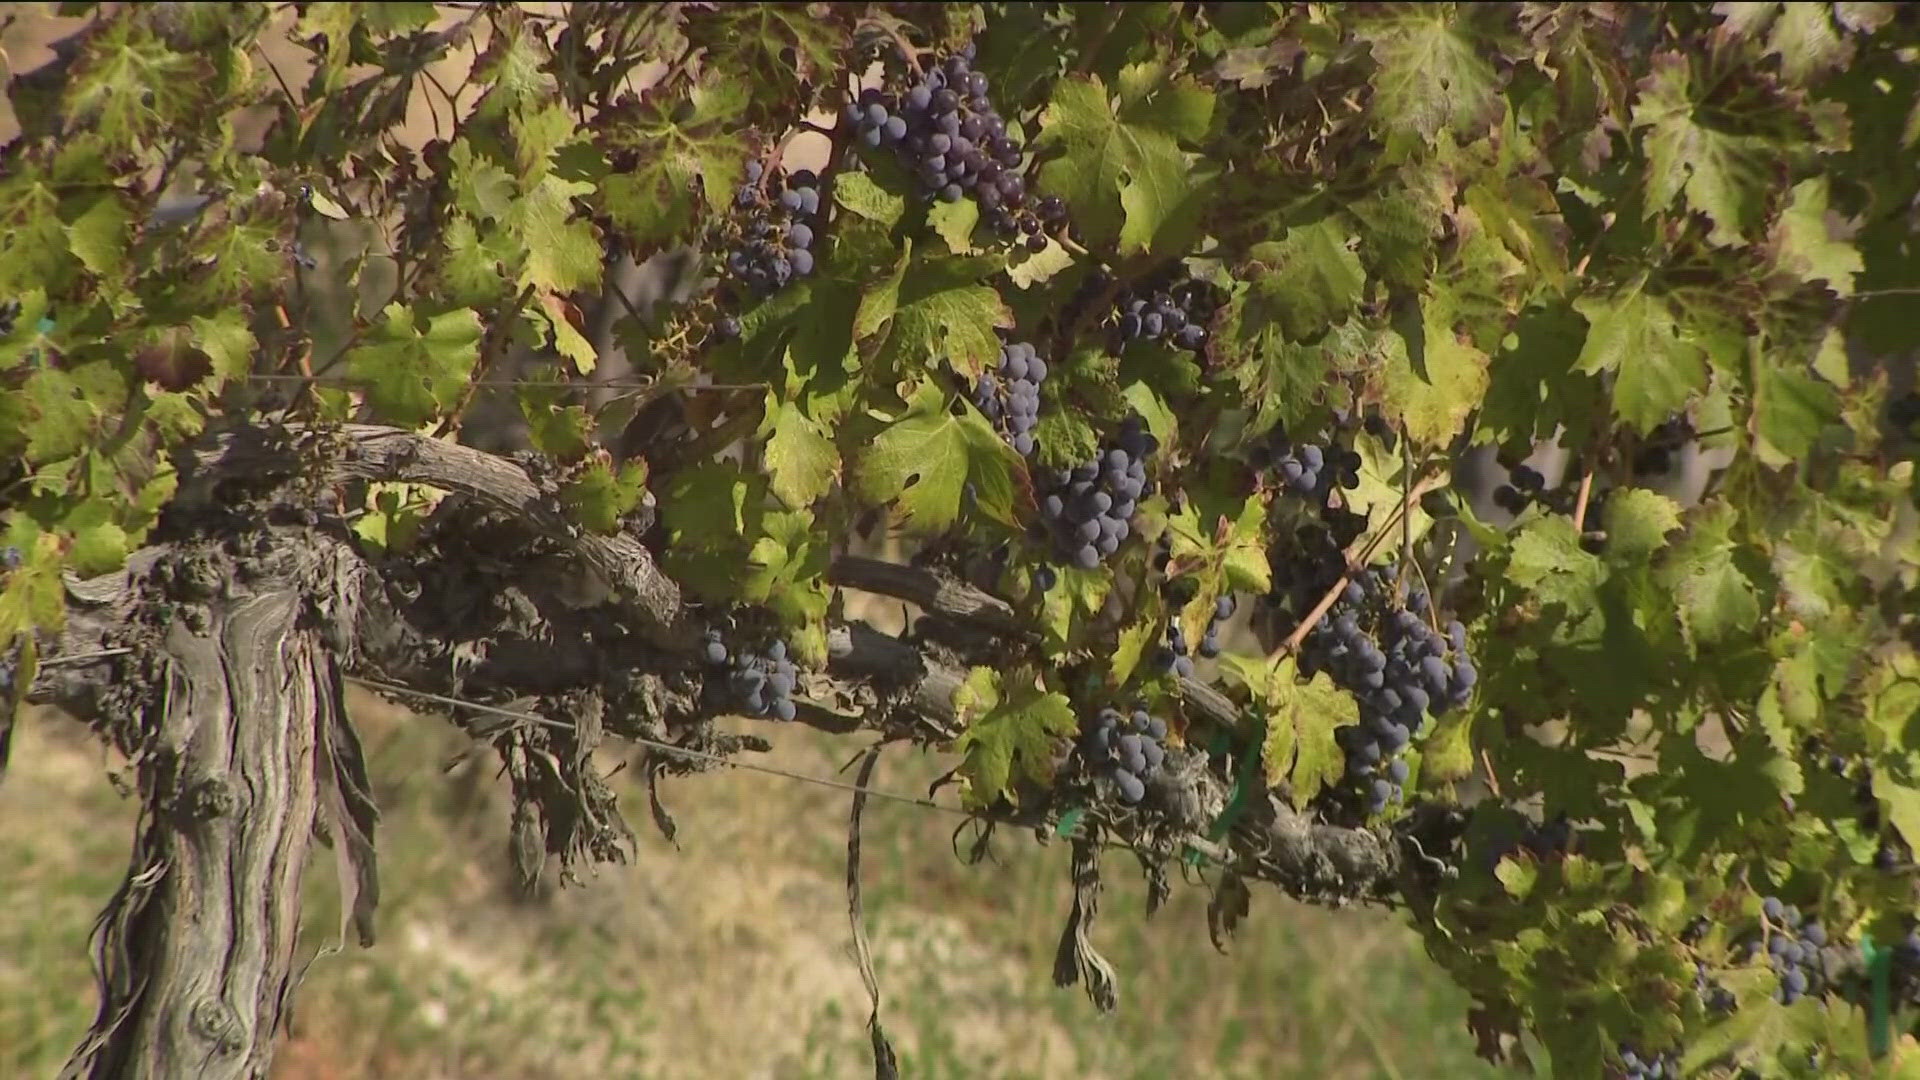 According to an Idaho Wine Commission Study, the wine industry in Idaho grew by 50% and generated $210 million in revenue.